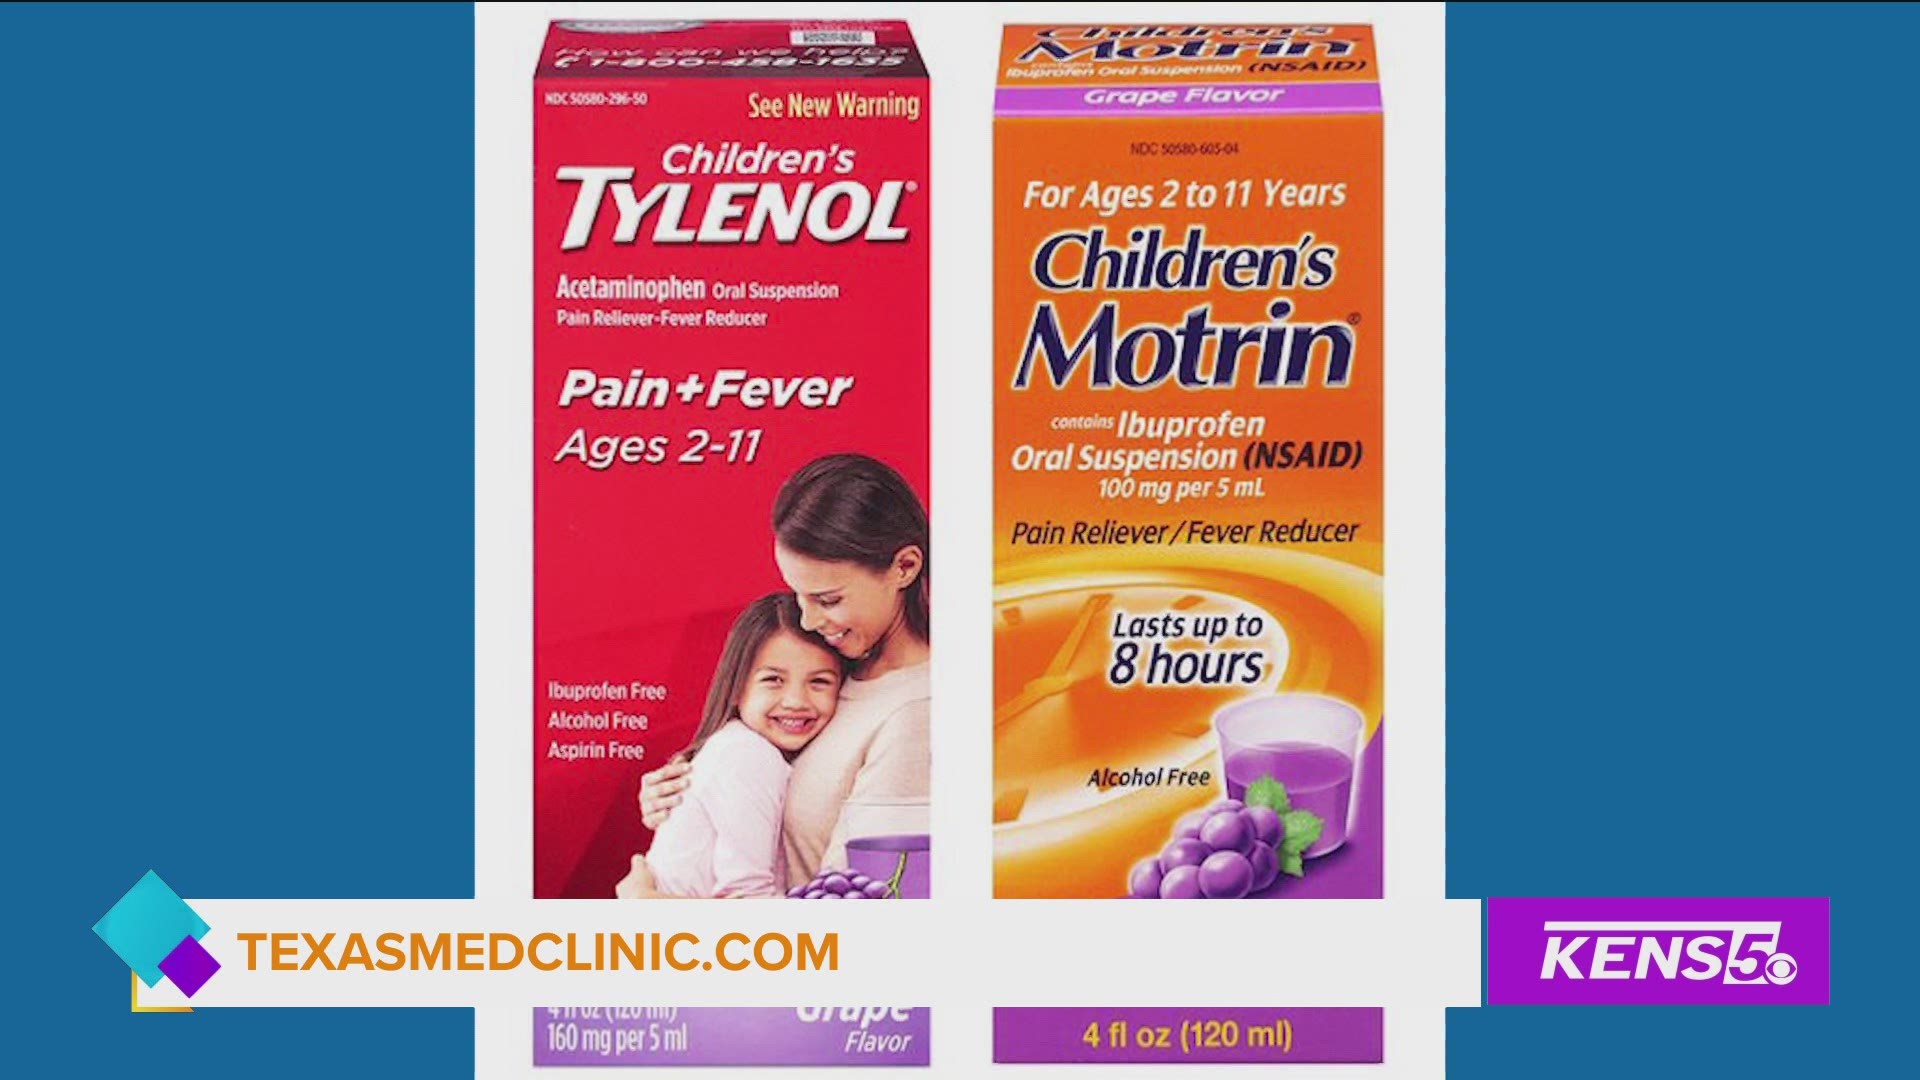 Whether you're tackling allergy season or seasonal sickness, Texas MedClinic shares the best medicine your child can take if they're fighting aches and fevers.